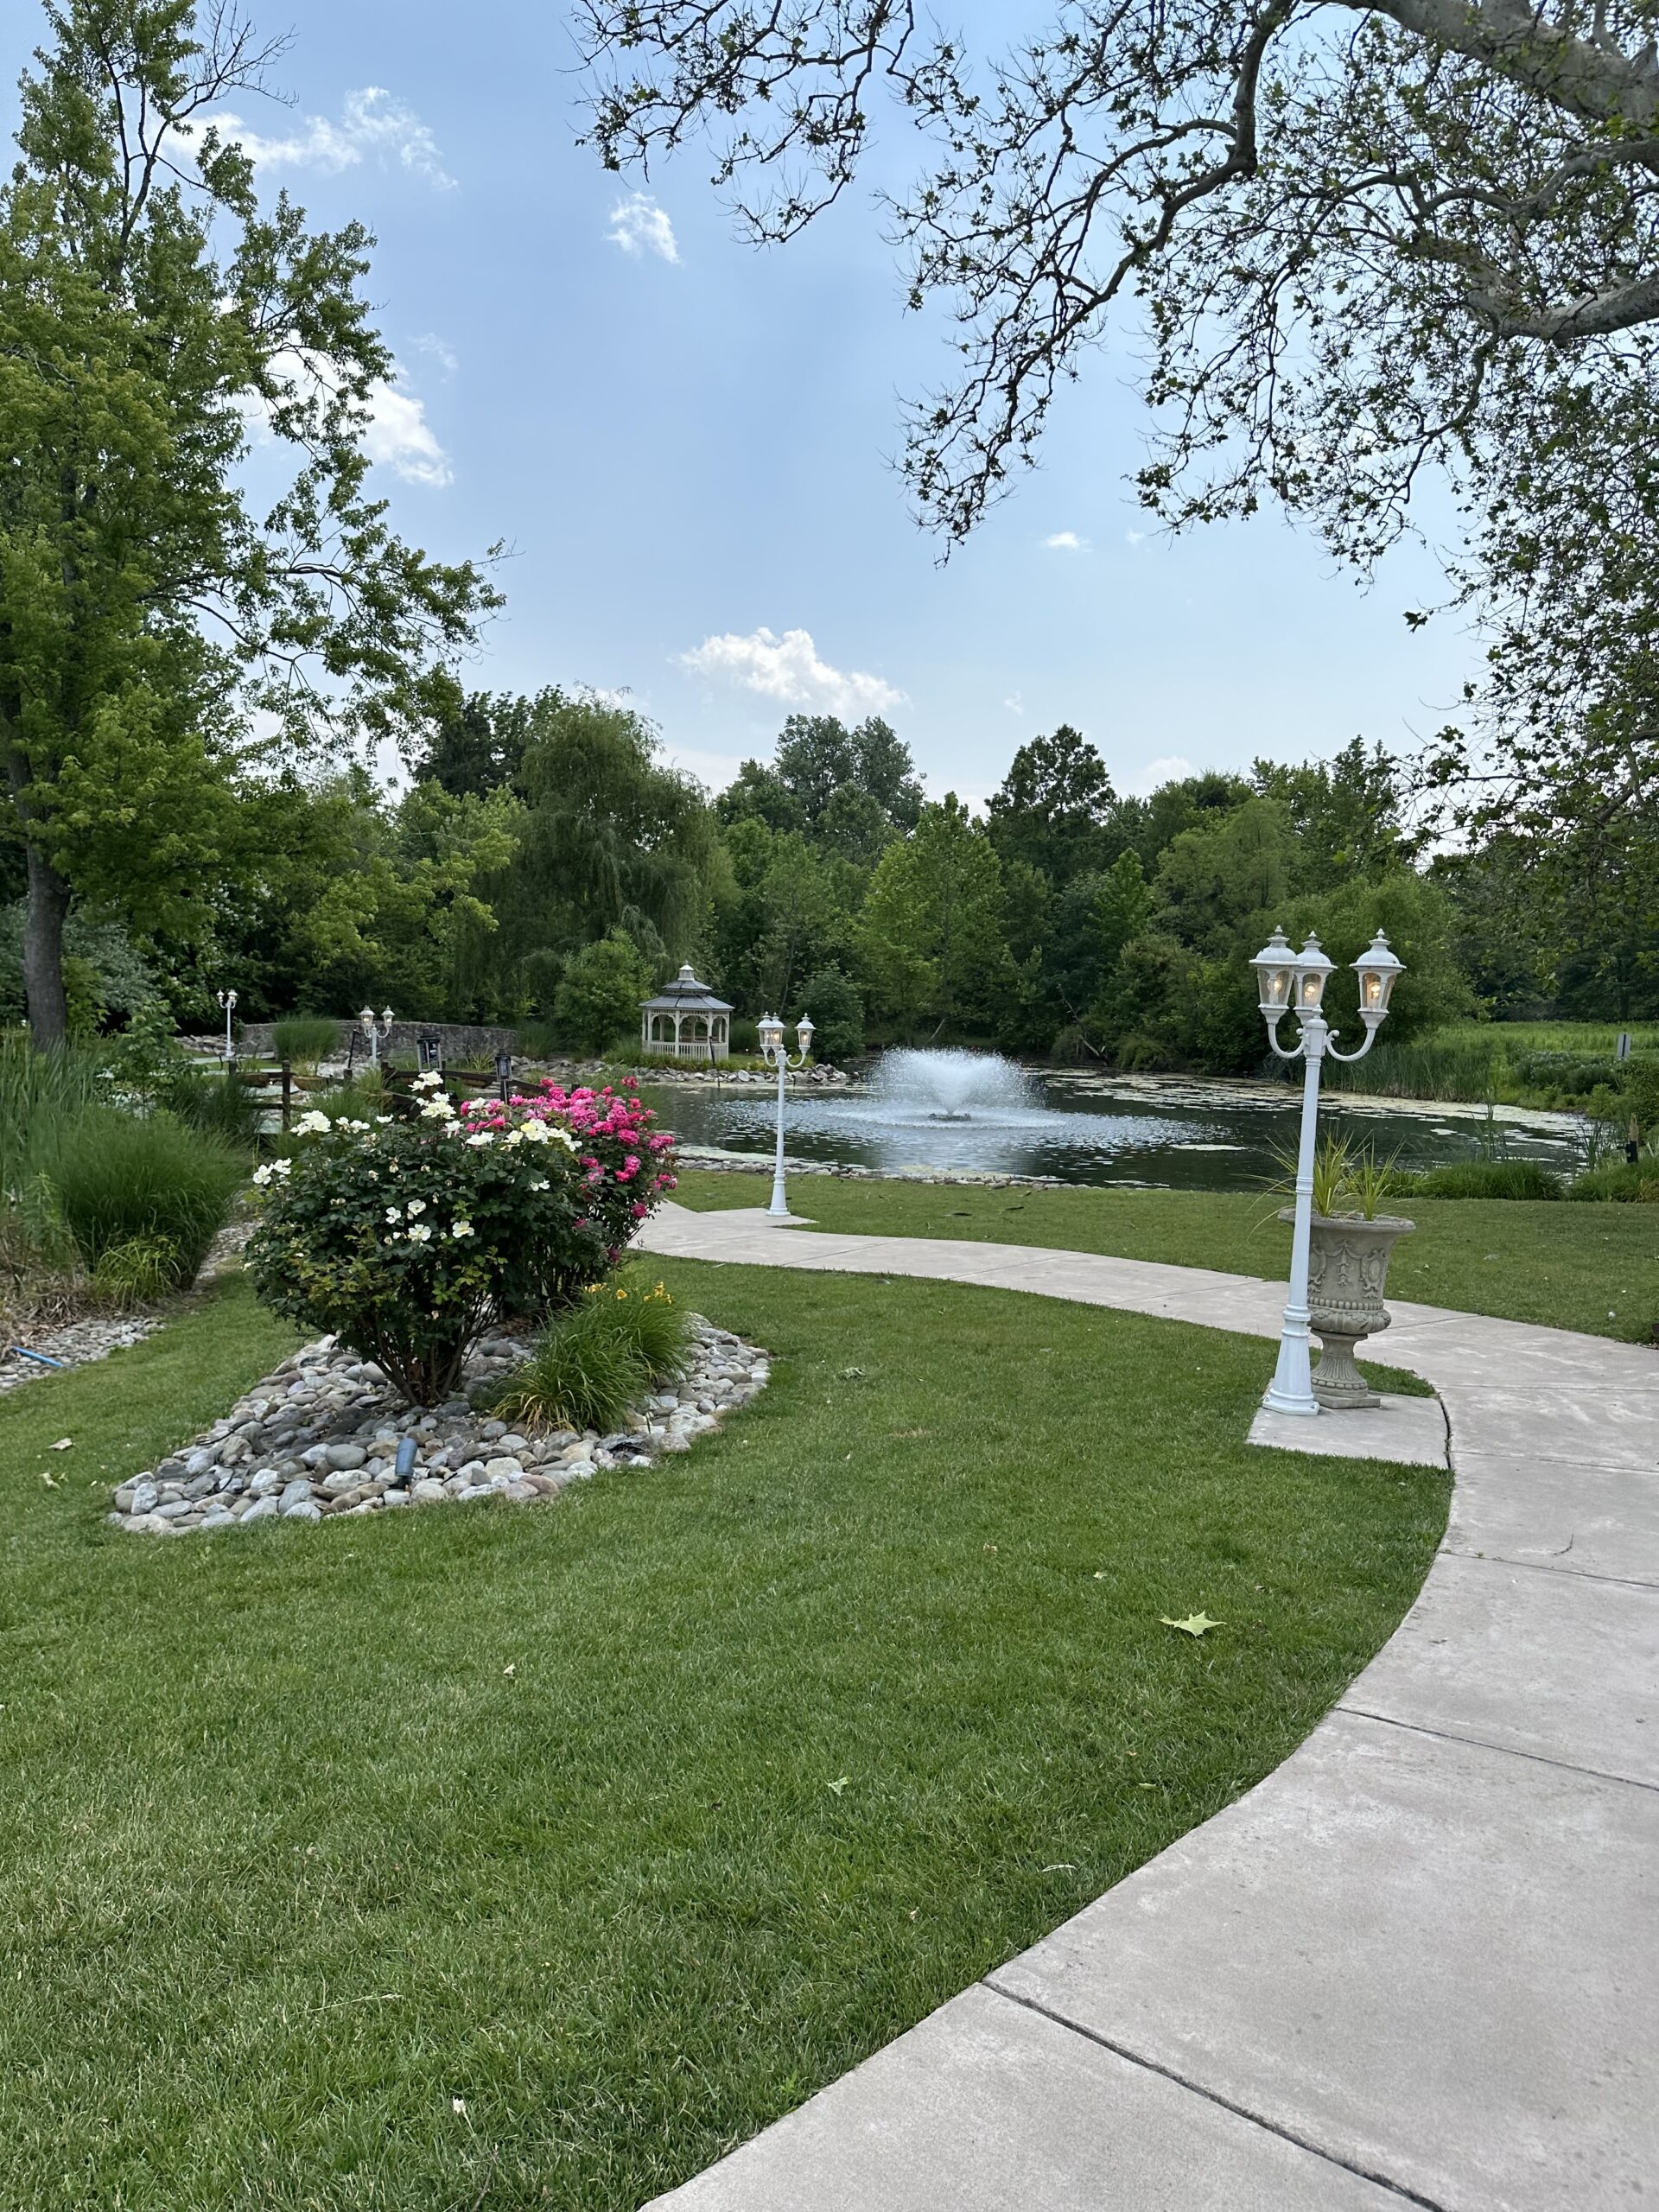 The manor house at prophecy creek offers, winding pathways and ponds, manicured and mature, landscaping perfect for photos